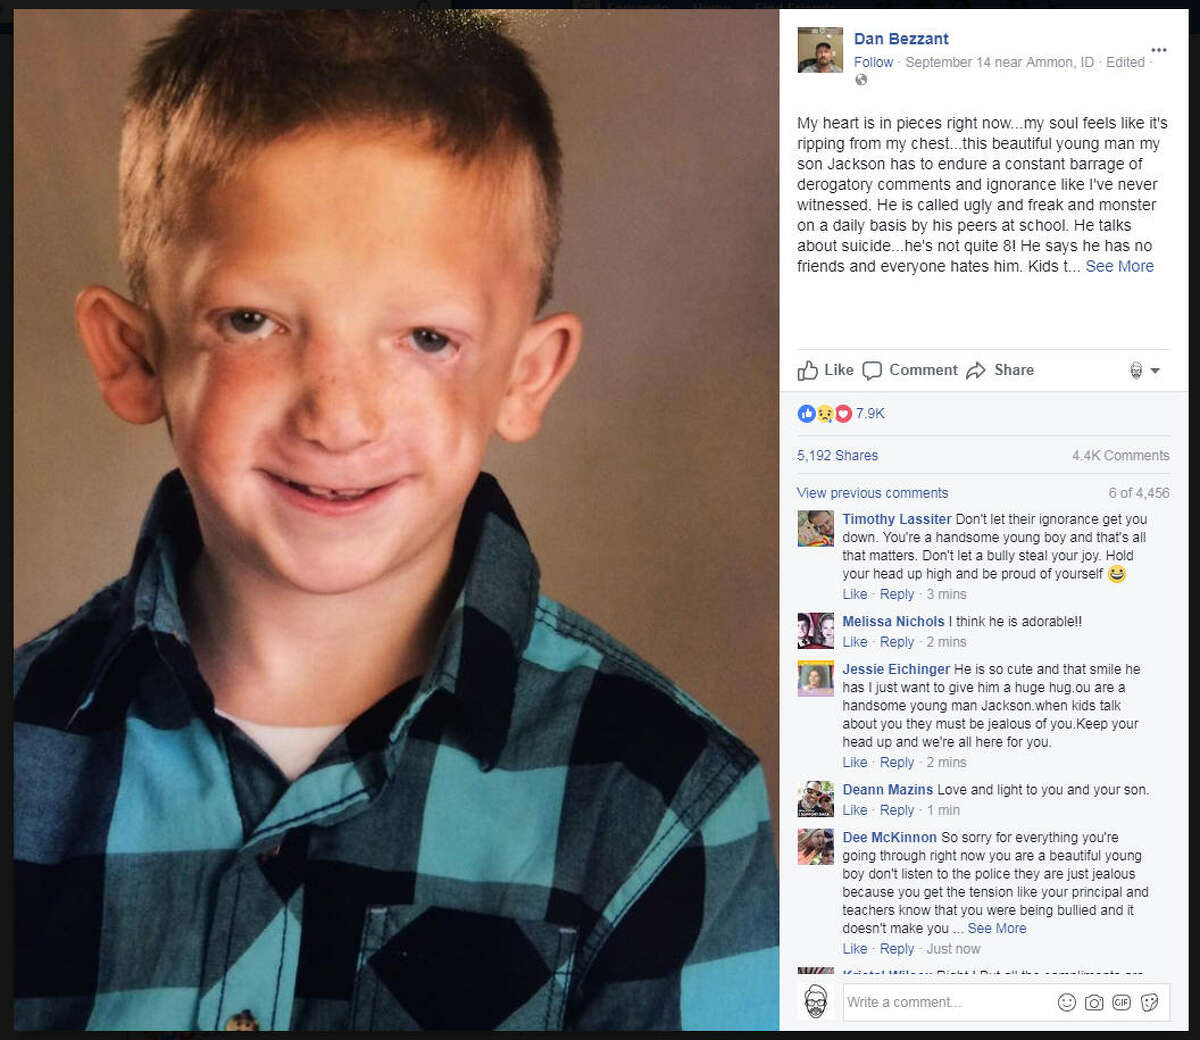 As a way to help cope with his son being relentlessly bullied in school, Dan Bezzant shared his family's story on Facebook and received thousands of comments in support. 